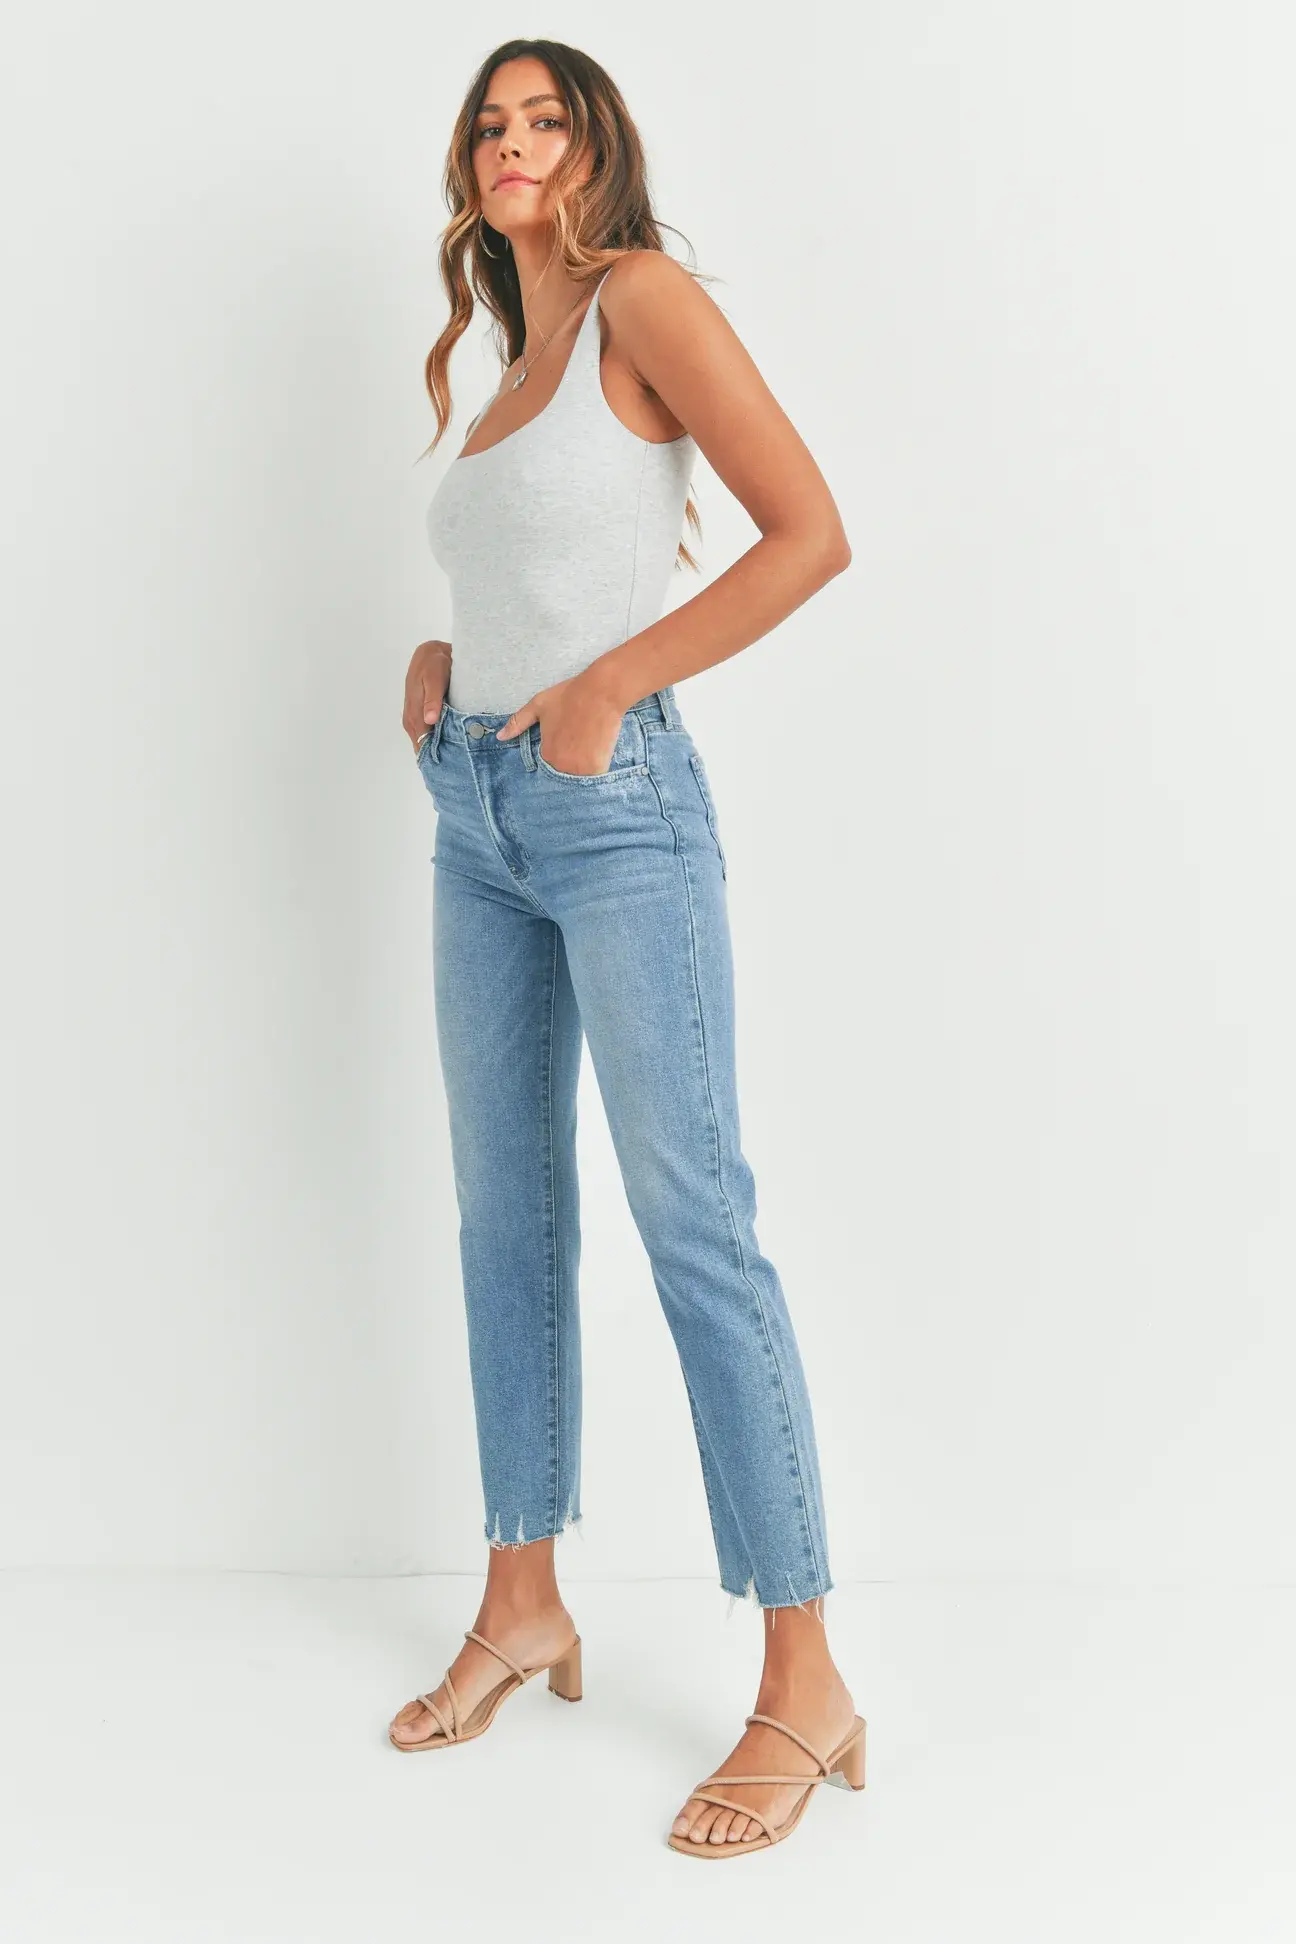 Our reusable Karen Kane Bottoms Classic Straight Jeans are in